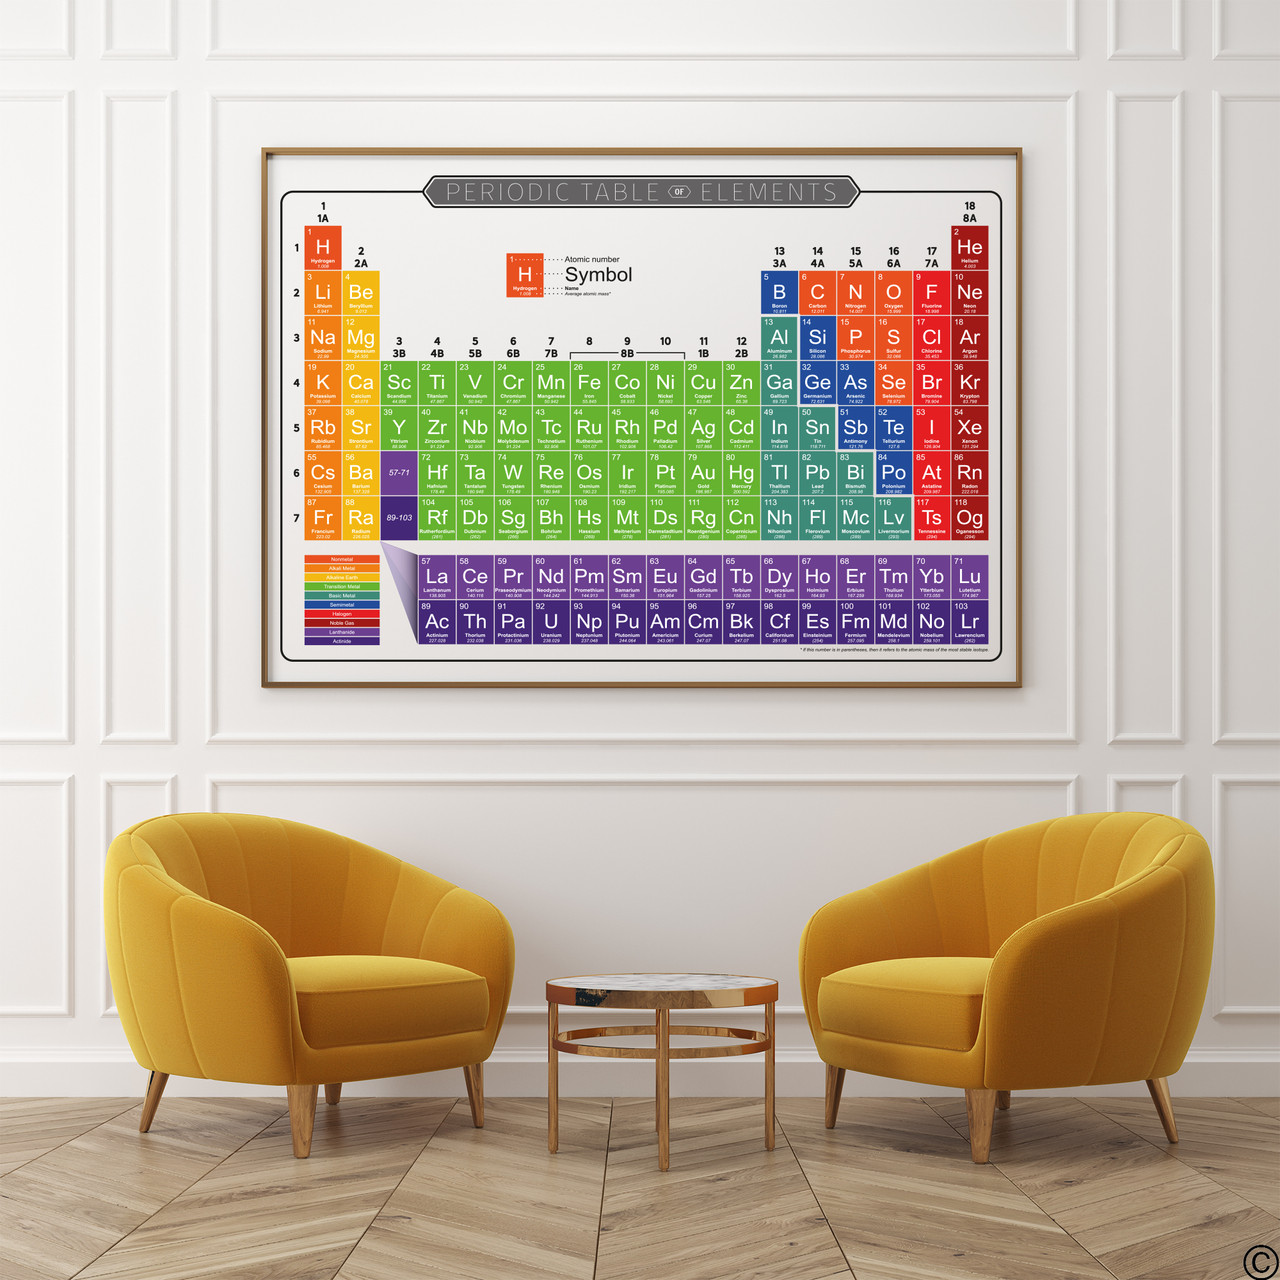 High quality print of the Periodic Table of Elements in a Rainbow color theme. Pick from 3 paper types and many sizes including standard frame sizes. Also available as a removable wall decal.